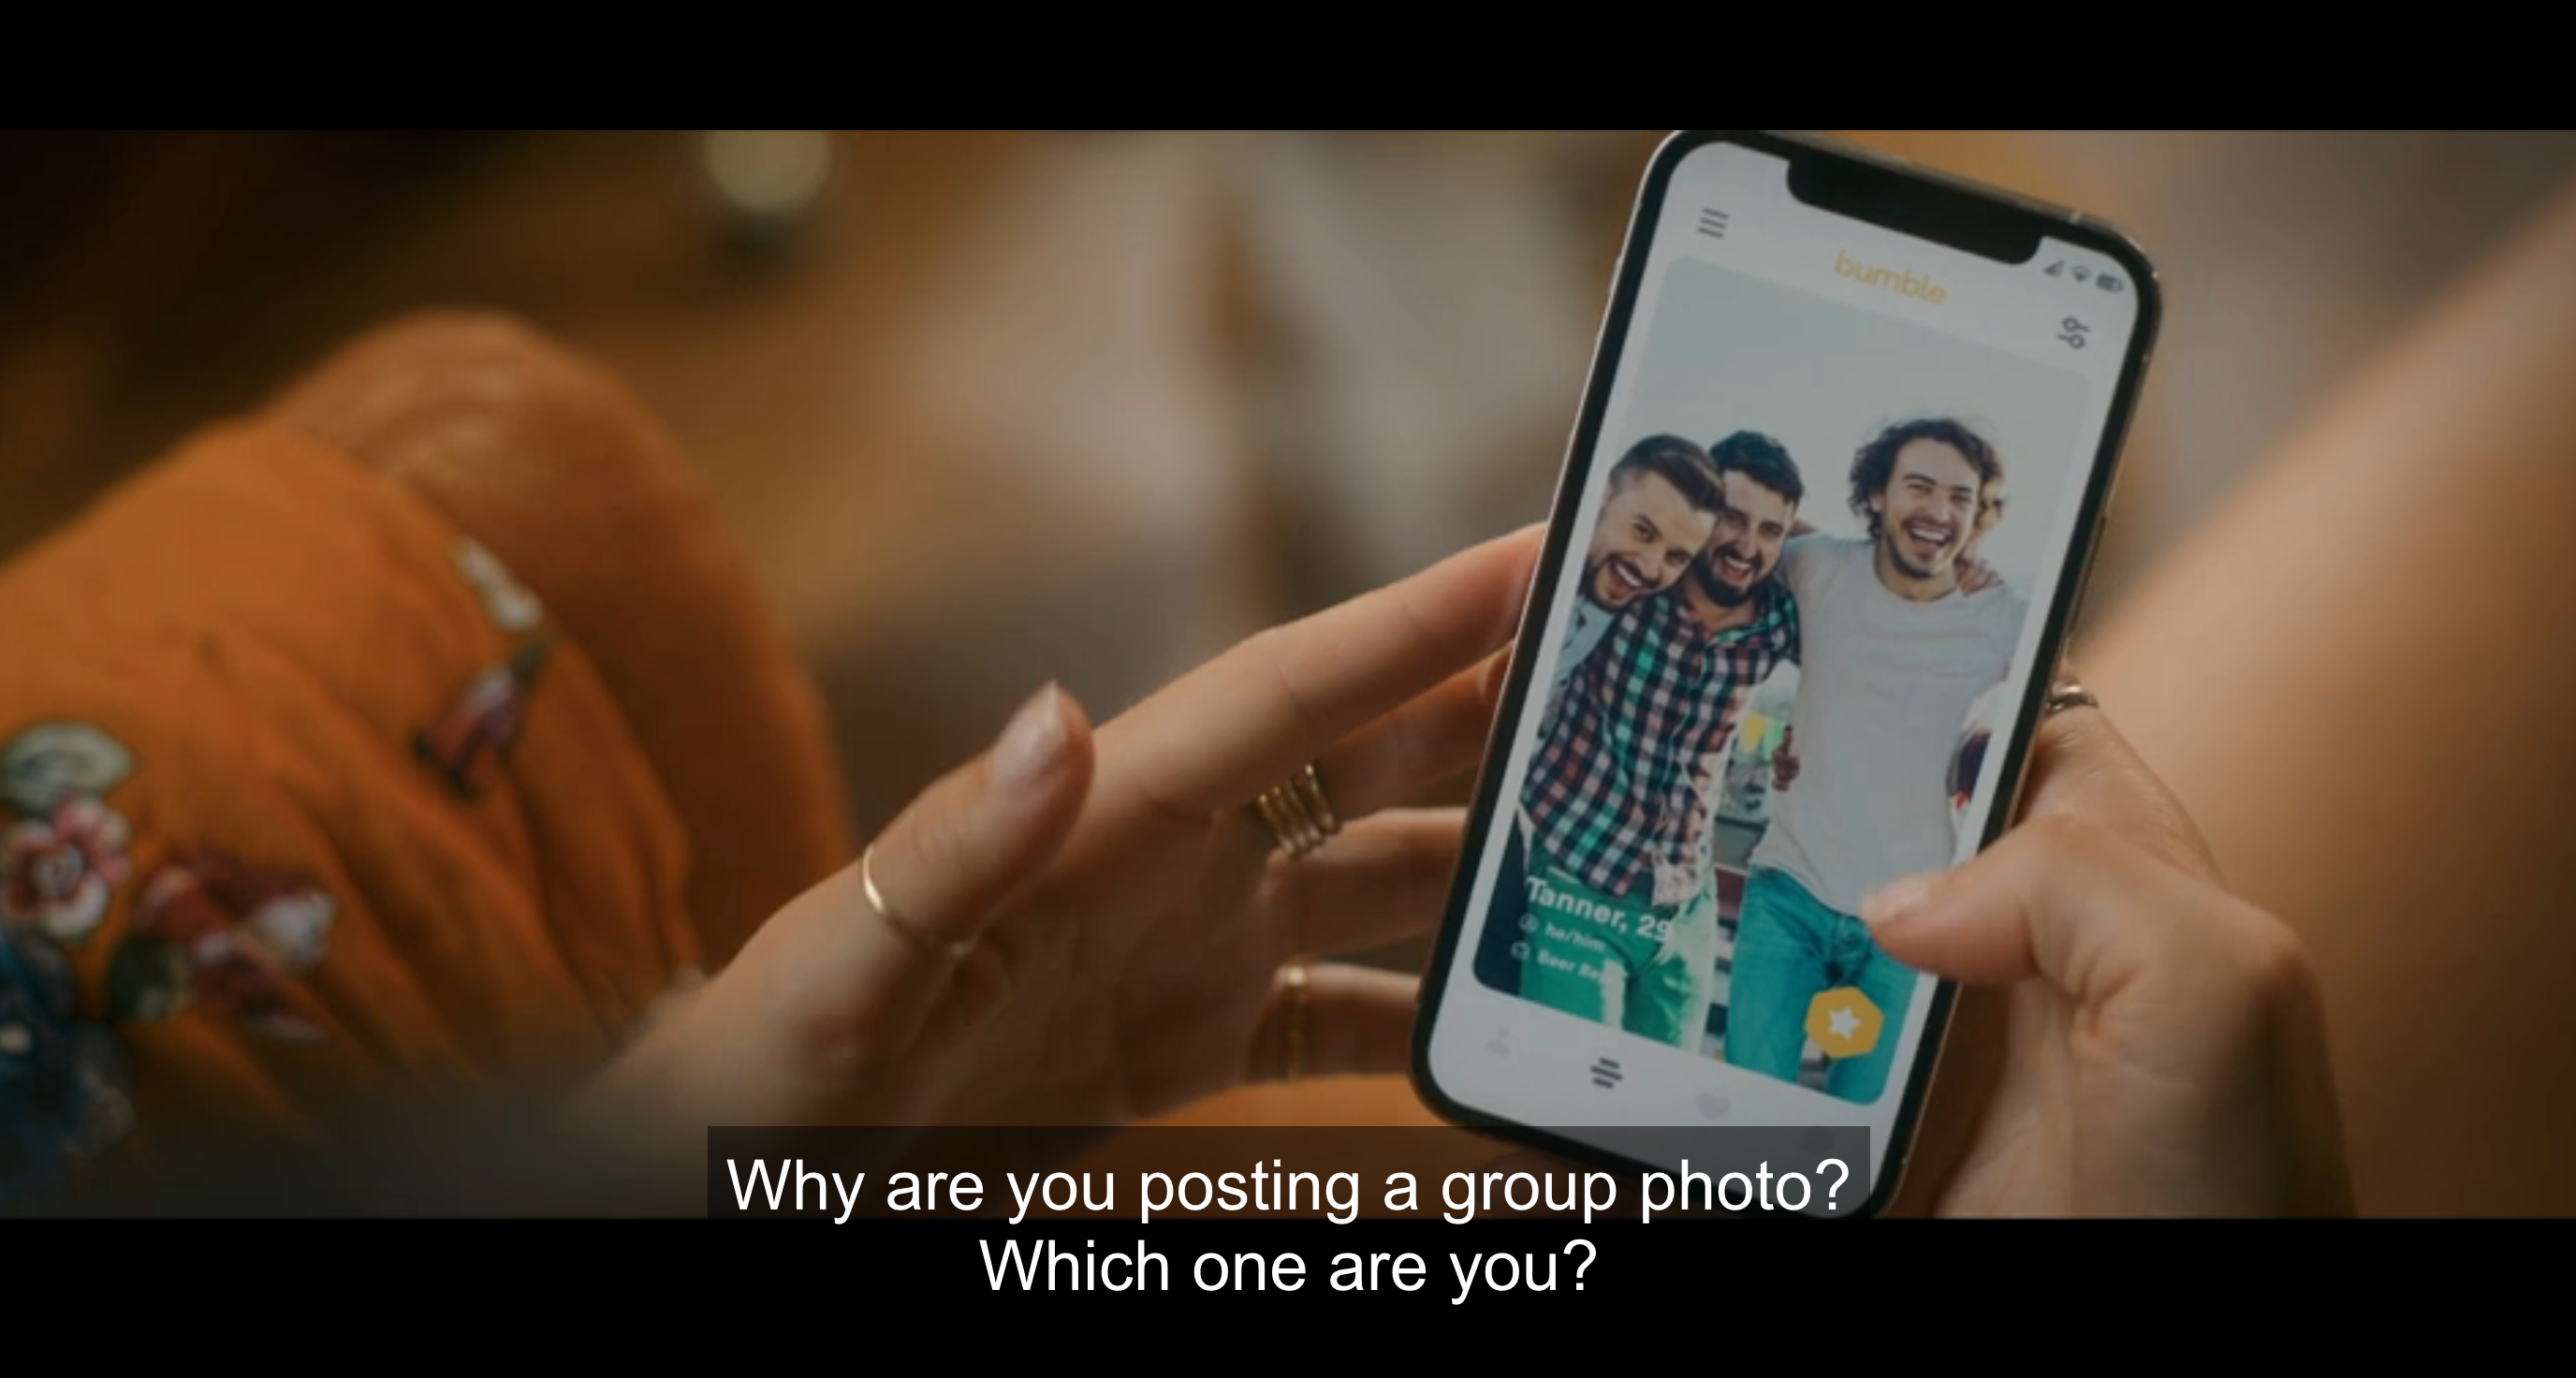 woman holding phone looking at group of three men on bumble and saying &#x27; why are you posting a group photo? which one are you?&#x27;